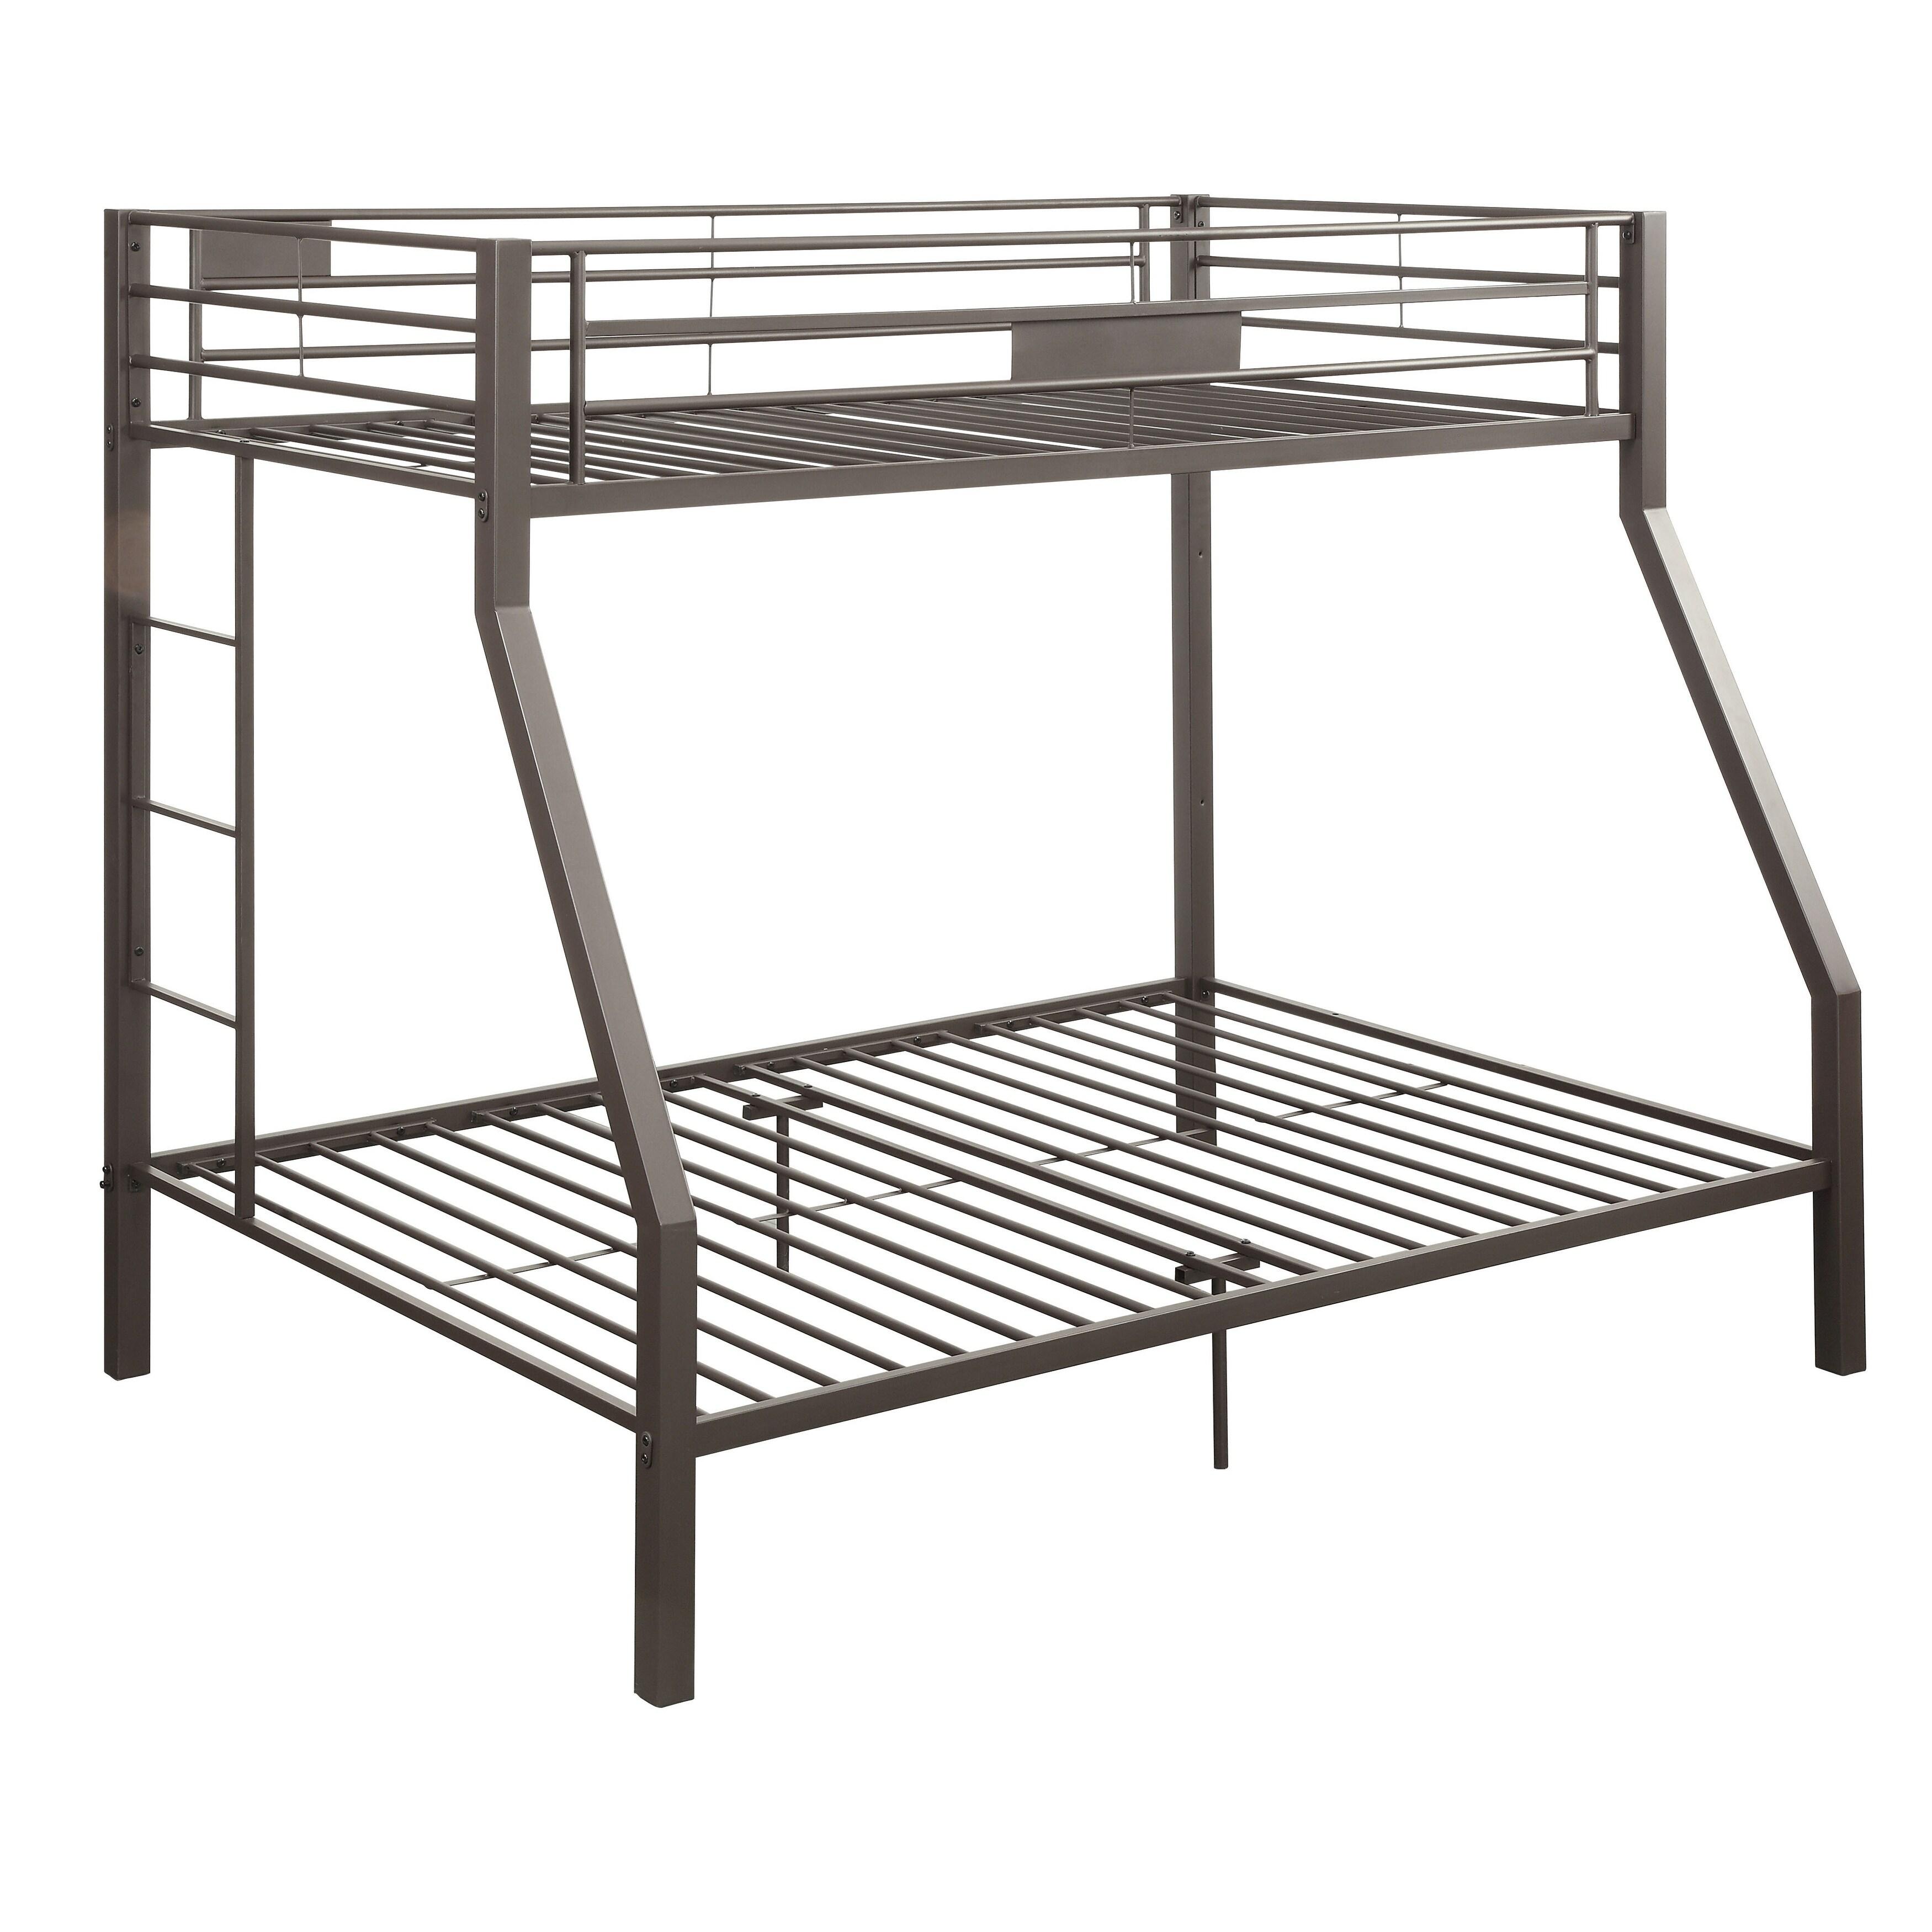 Contemporary Twin XL/Queen Bunk Bed Limbra 38000 in Black 